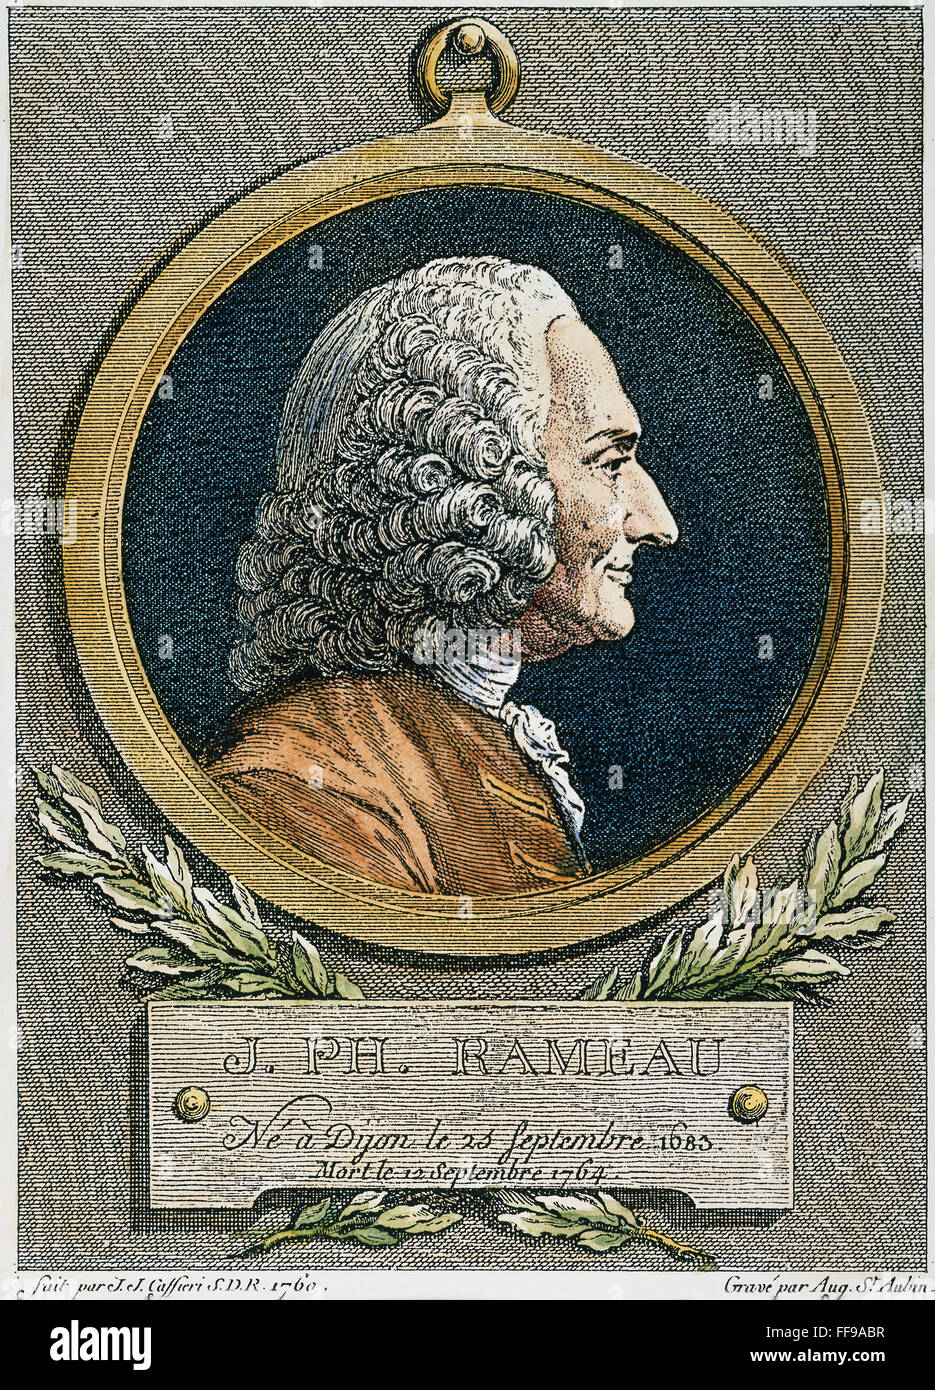 JEAN PHILIPPE RAMEAU /n(1683-1764). French composer and music theorist. Copper engraving, 1762, by Augustin de Saint-Aubin after a bust, 1760, by Jean-Jacques Caffieri. Stock Photo